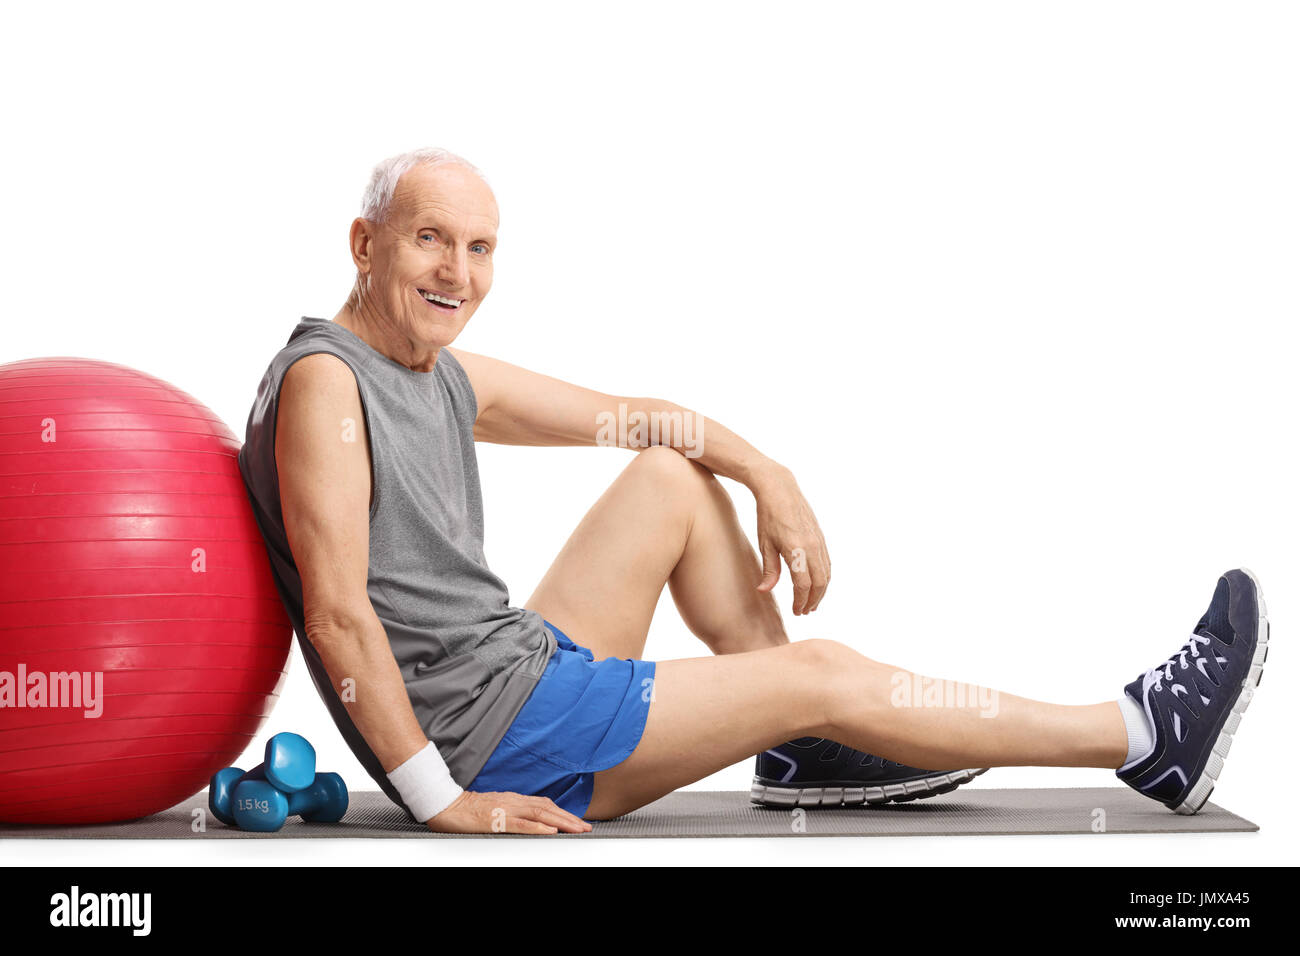 Senior with a pilates ball and dumbbells sitting on an exercise mat isolated on white background Stock Photo